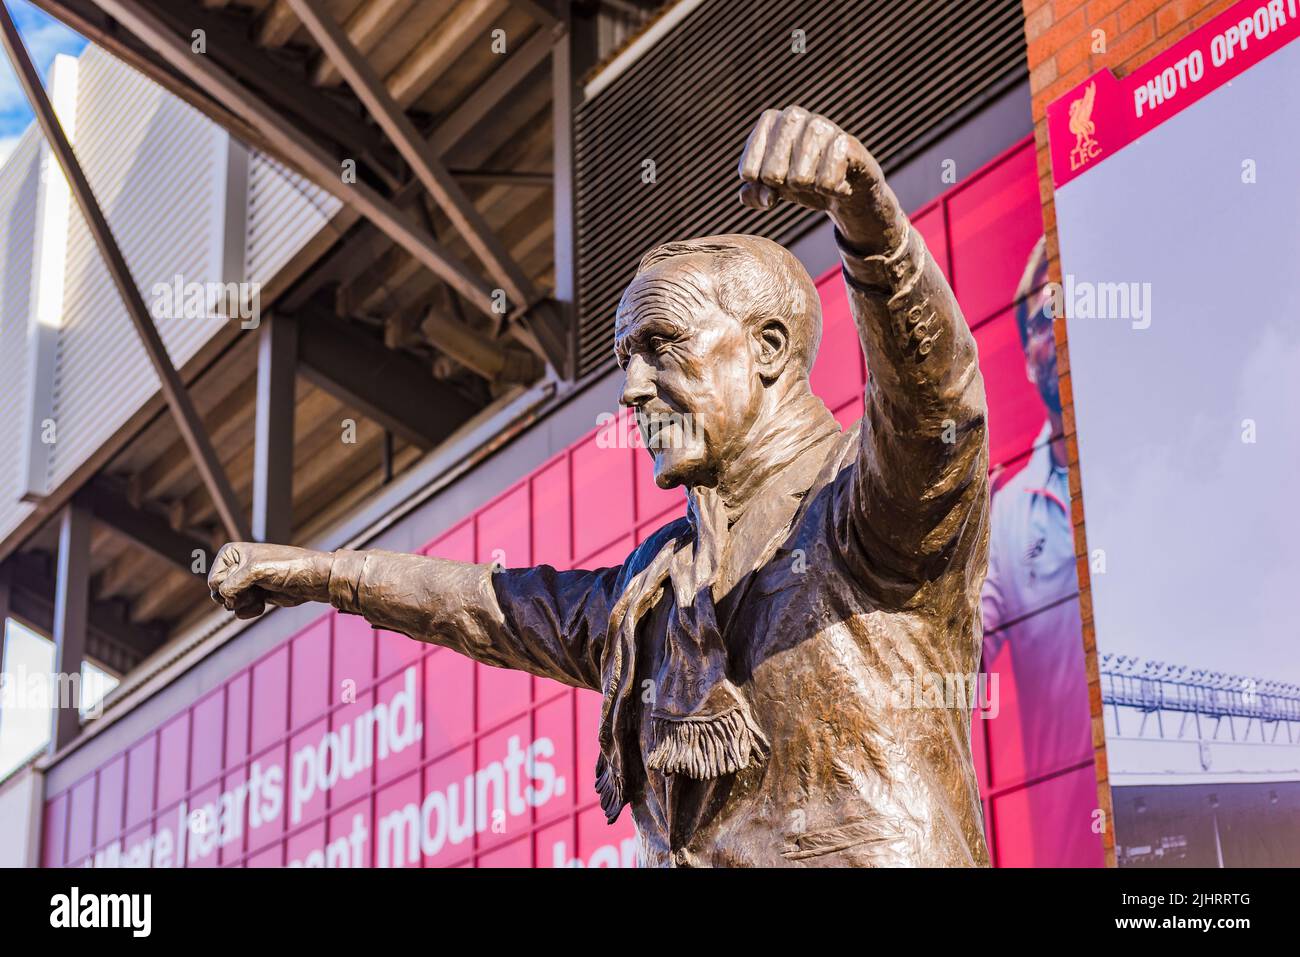 The statue of Bill Shankly, Liverpool Football Club manager 1959-1974, erected in 1997, outside the Kop at Anfield. Anfield, Liverpool, Merseyside, La Stock Photo